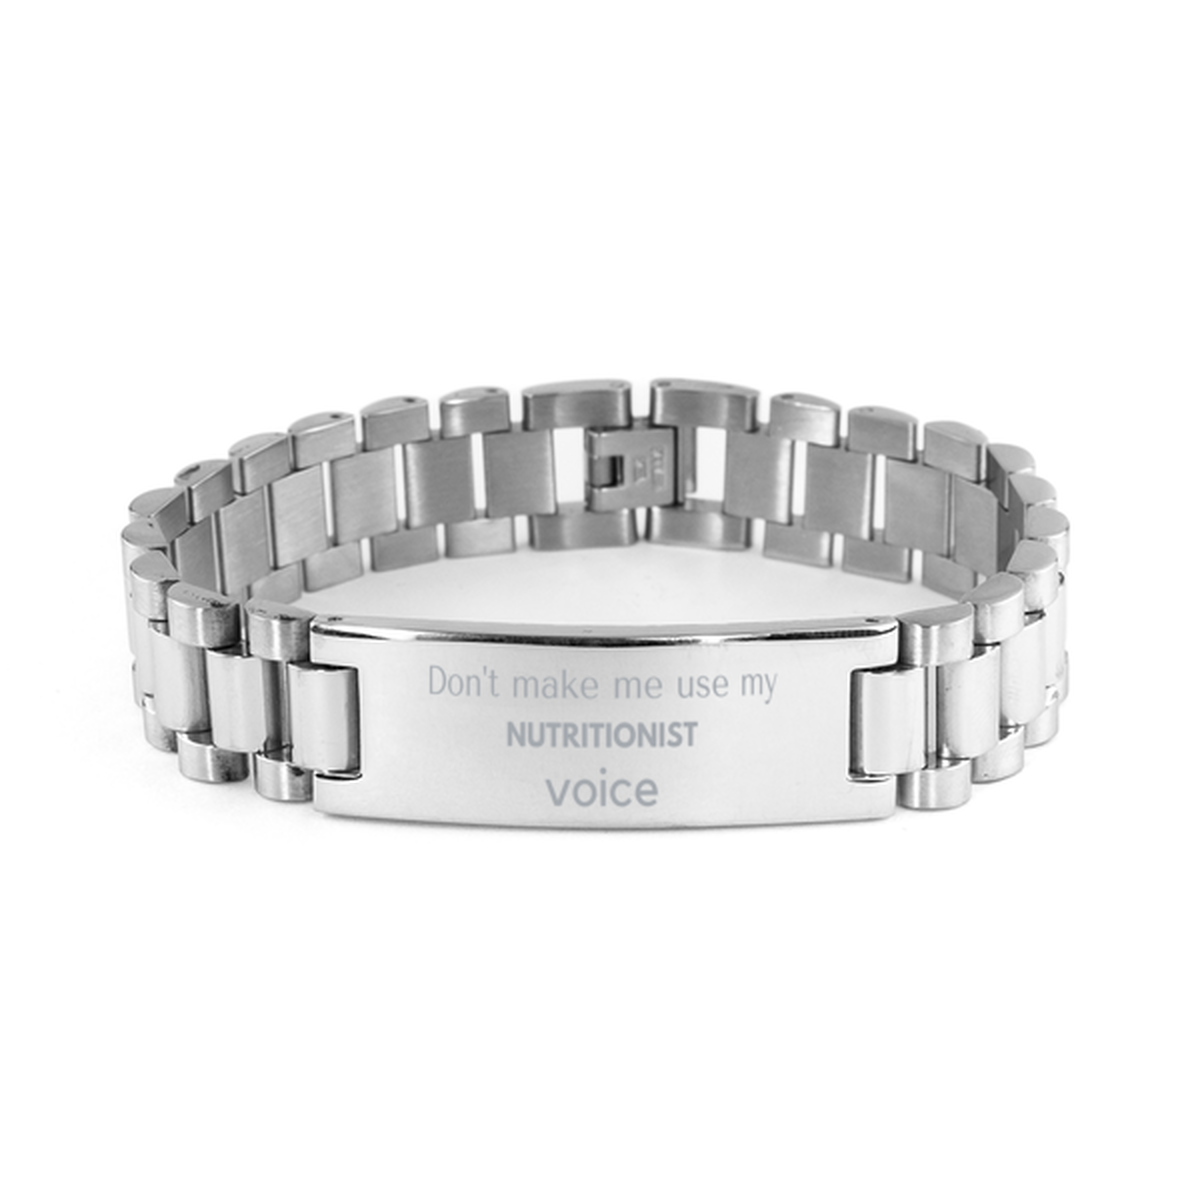 Don't make me use my Nutritionist voice, Sarcasm Nutritionist Gifts, Christmas Nutritionist Ladder Stainless Steel Bracelet Birthday Unique Gifts For Nutritionist Coworkers, Men, Women, Colleague, Friends